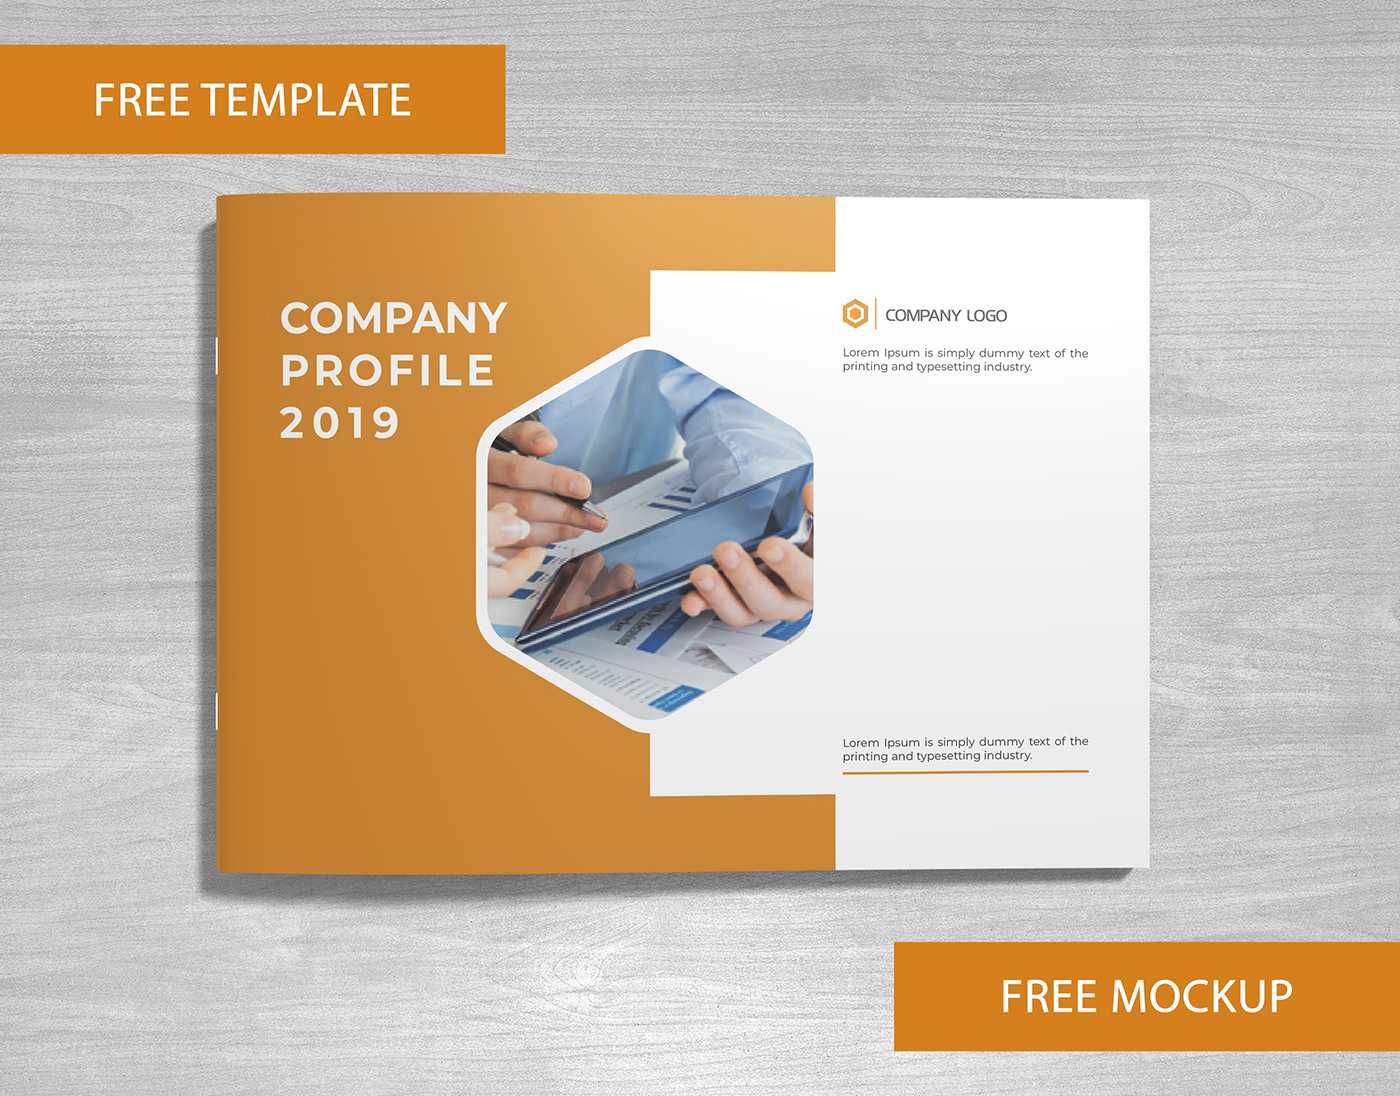 Company Profile Free Template And Mockup Download On Behance With Free Illustrator Brochure Templates Download